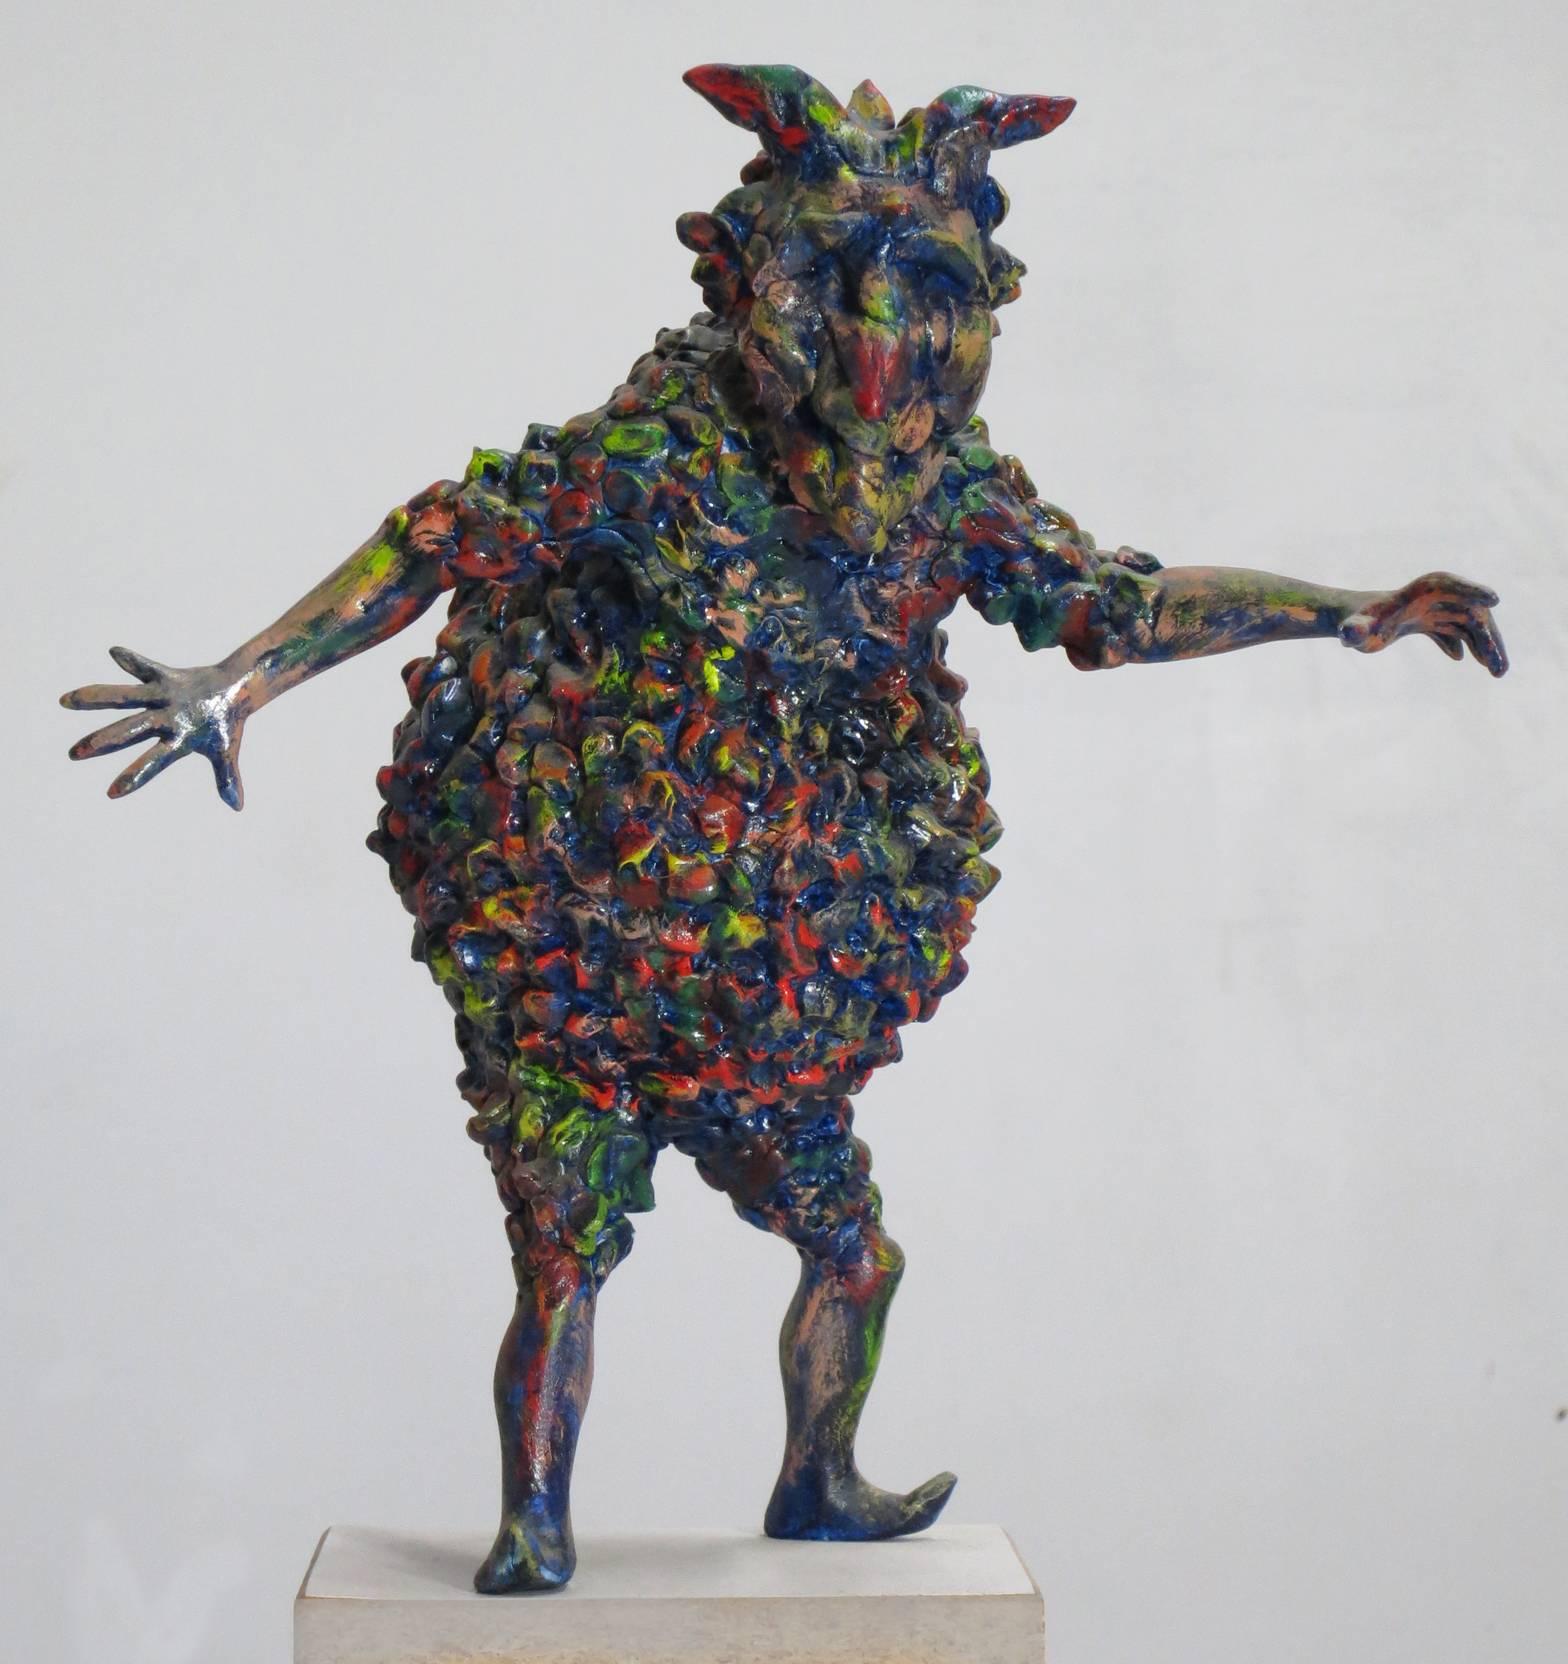 Howard Kalish Figurative Sculpture - “Small Rigoletto”, jester of Verdi opera, romps in reds, blues, and greens